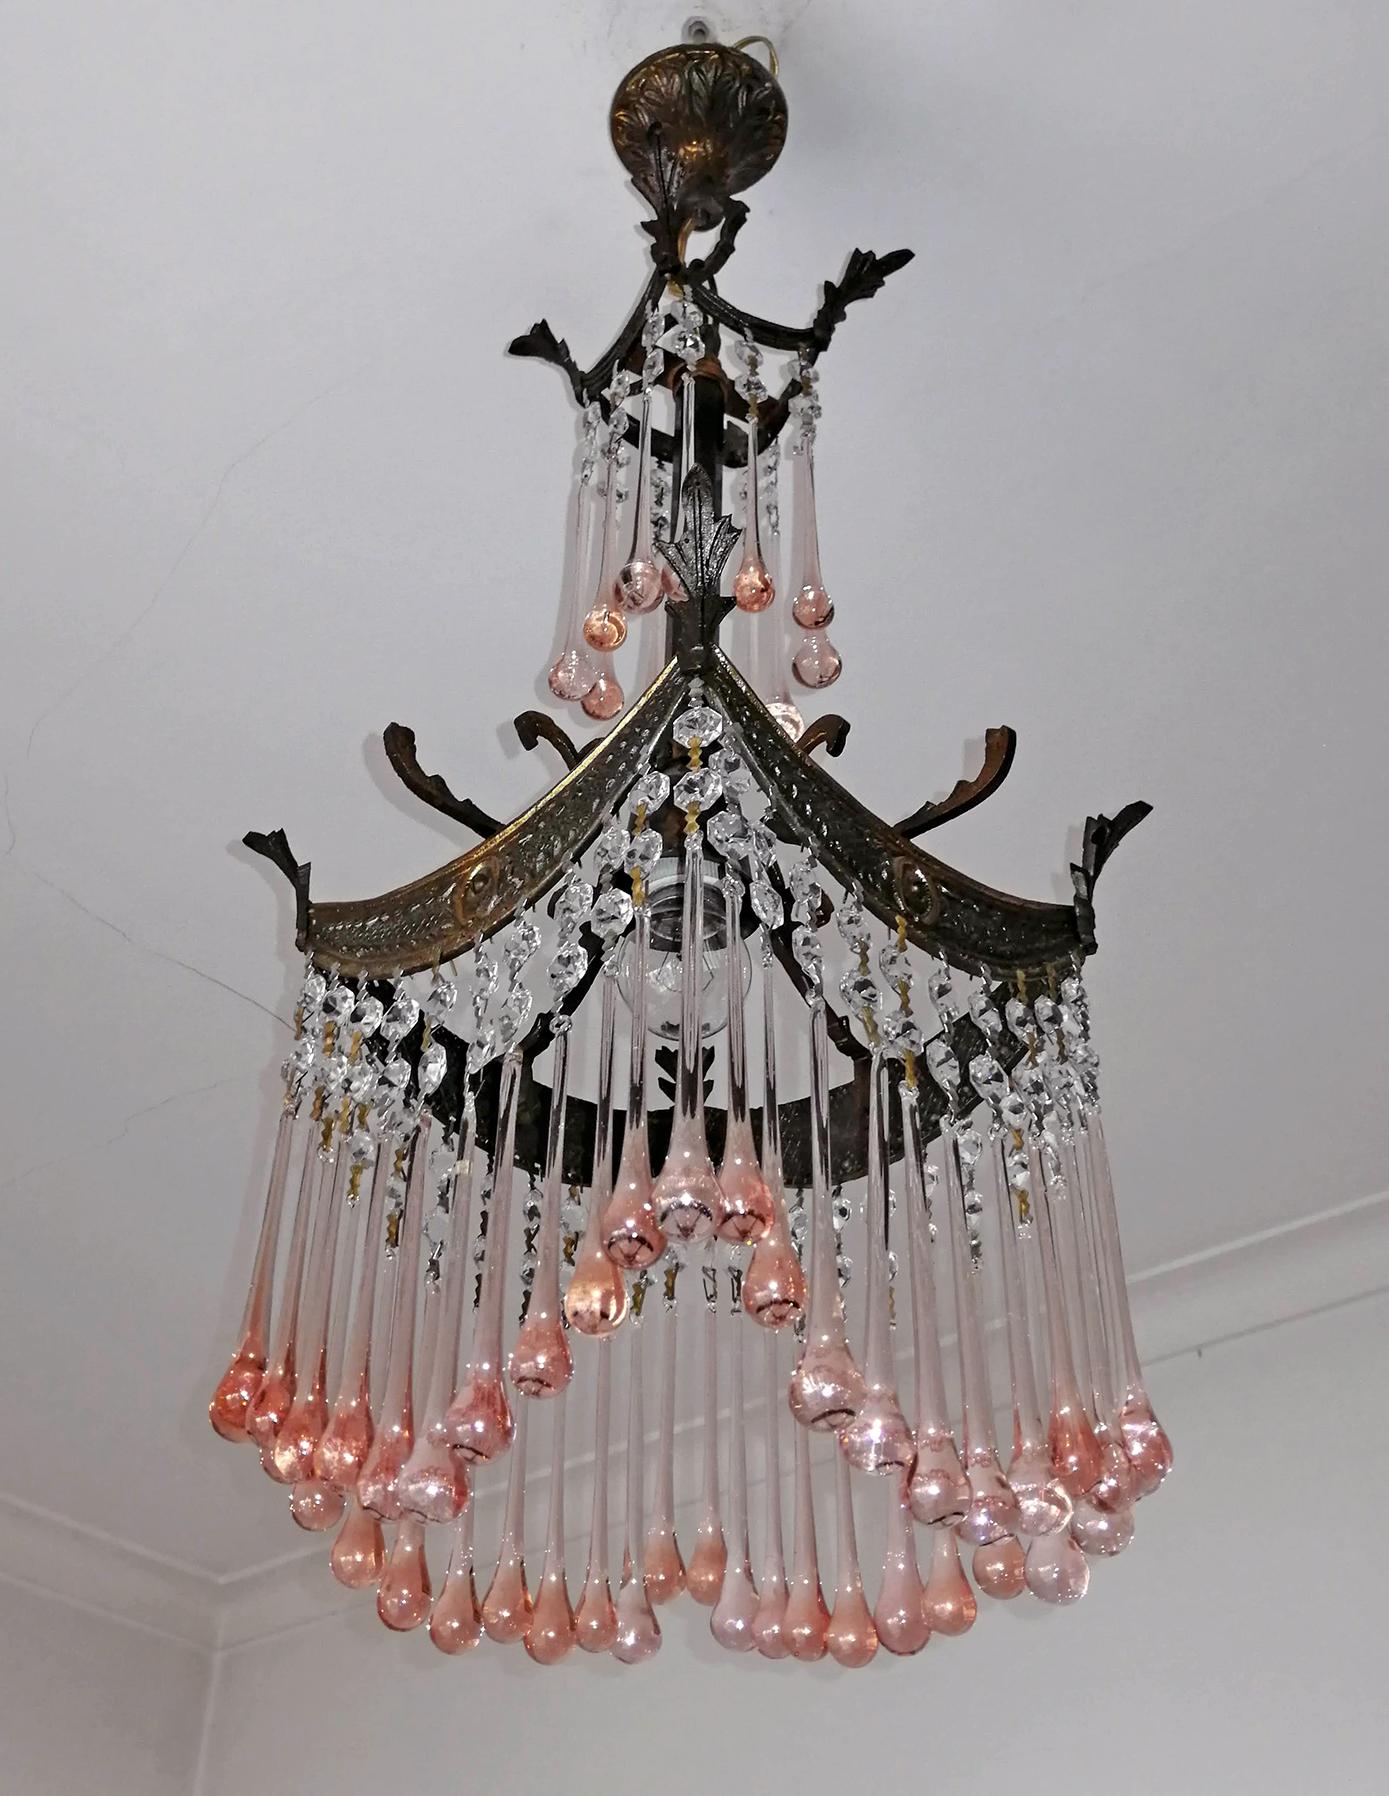 Beautiful antique Italian Art Nouveau and Art Deco Murano pink crystals tear drop bronze chandelier in a radial pattern with a very sparkling effect typical of Hollywood style and glamour. The fixture is brass and the glass is hand